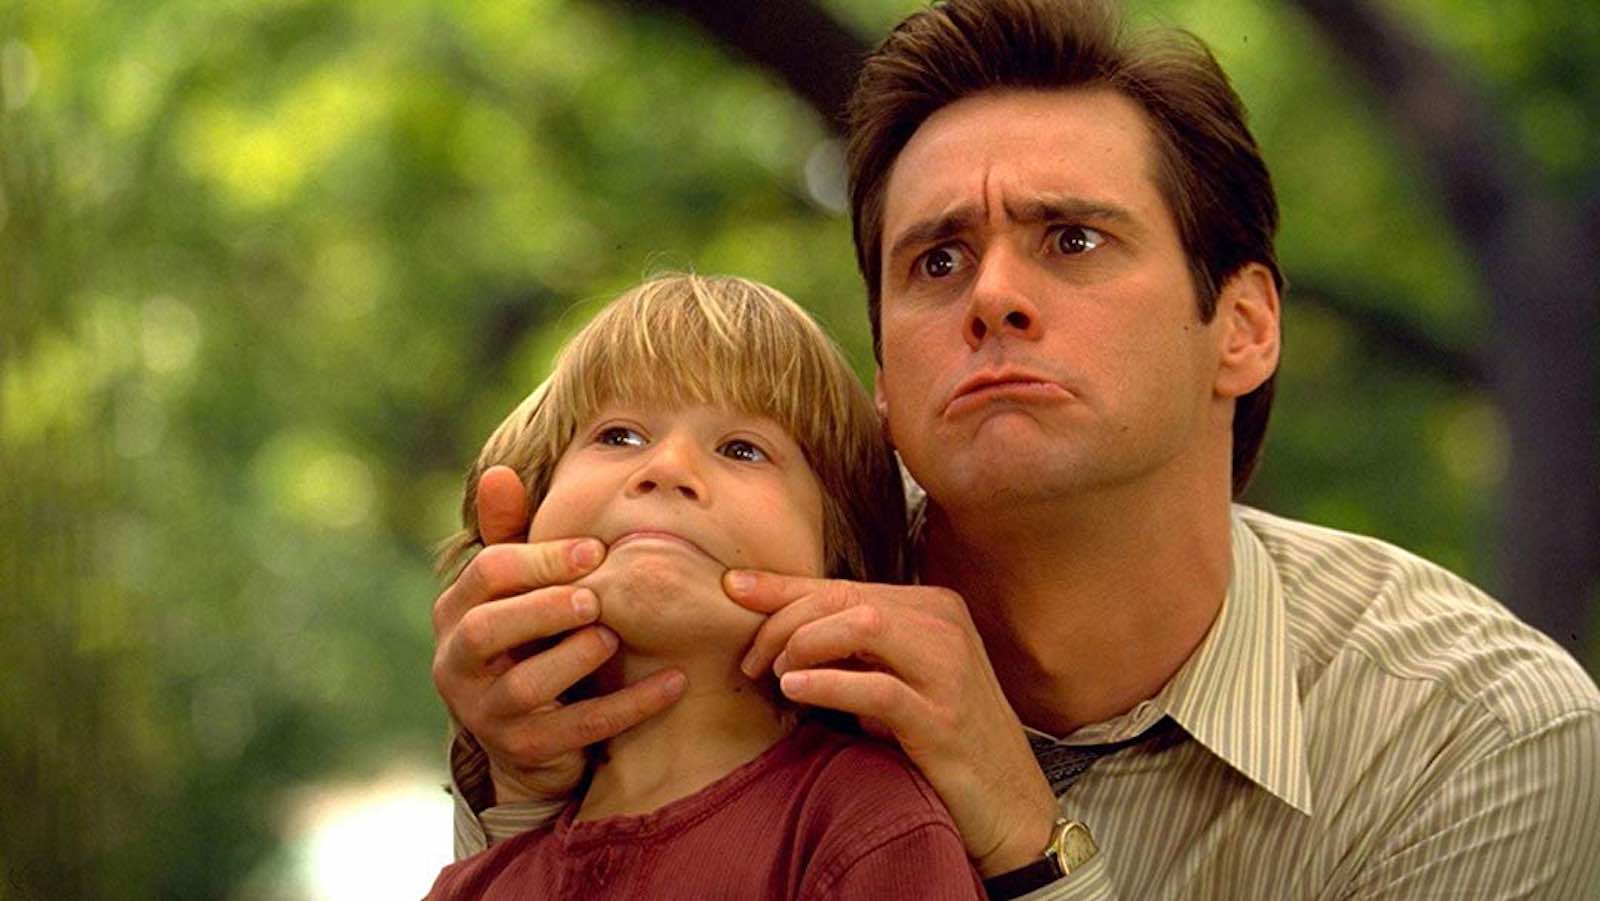 Jim Carrey's Most Memorable Movie Roles: From The Mask to Eternal Sunshine of the Spotless Mind - wide 3